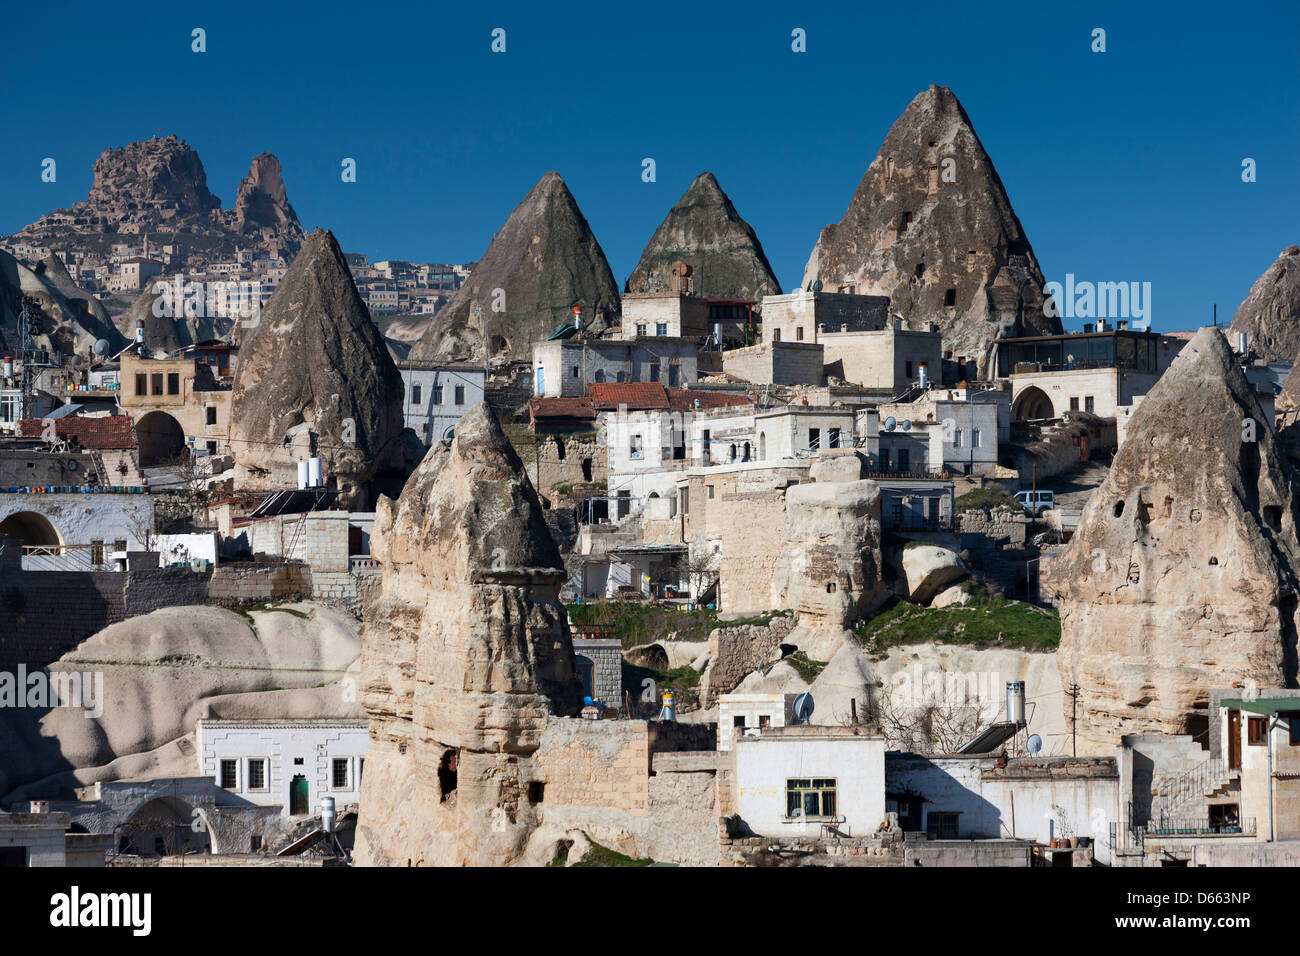 Rock formations known as fairy chimneys in the town of Göreme, Cappadocia, Turkey Stock Photo